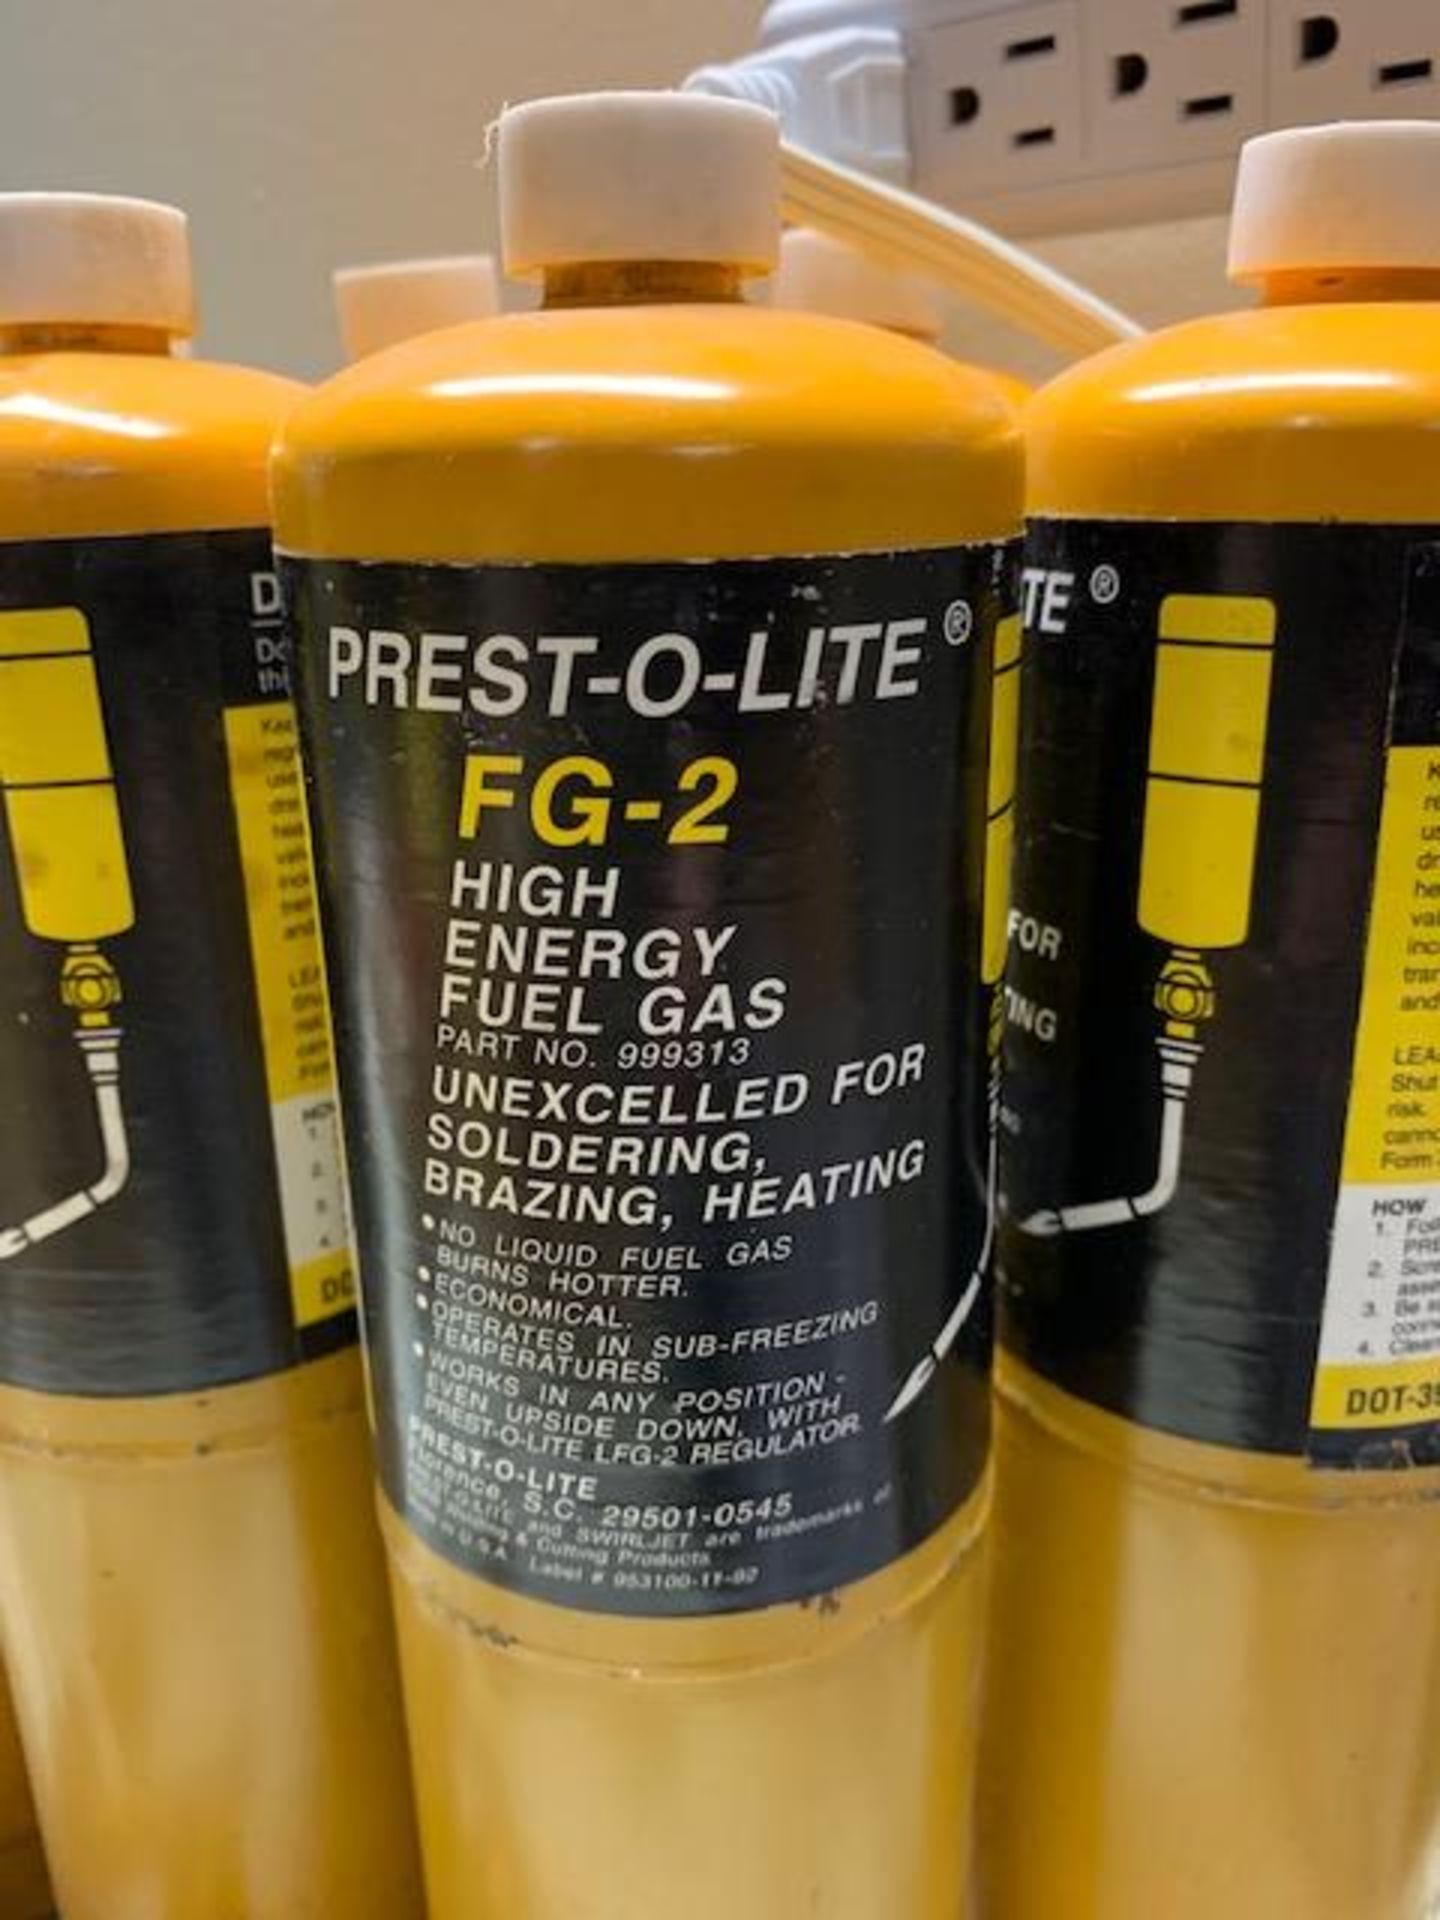 (7) BOTTLES OF PREST-O-LITE FG-2 HIGH ENERGY FUEL GAS CANISTERS AND (3) BURNING TIPS - Image 2 of 2